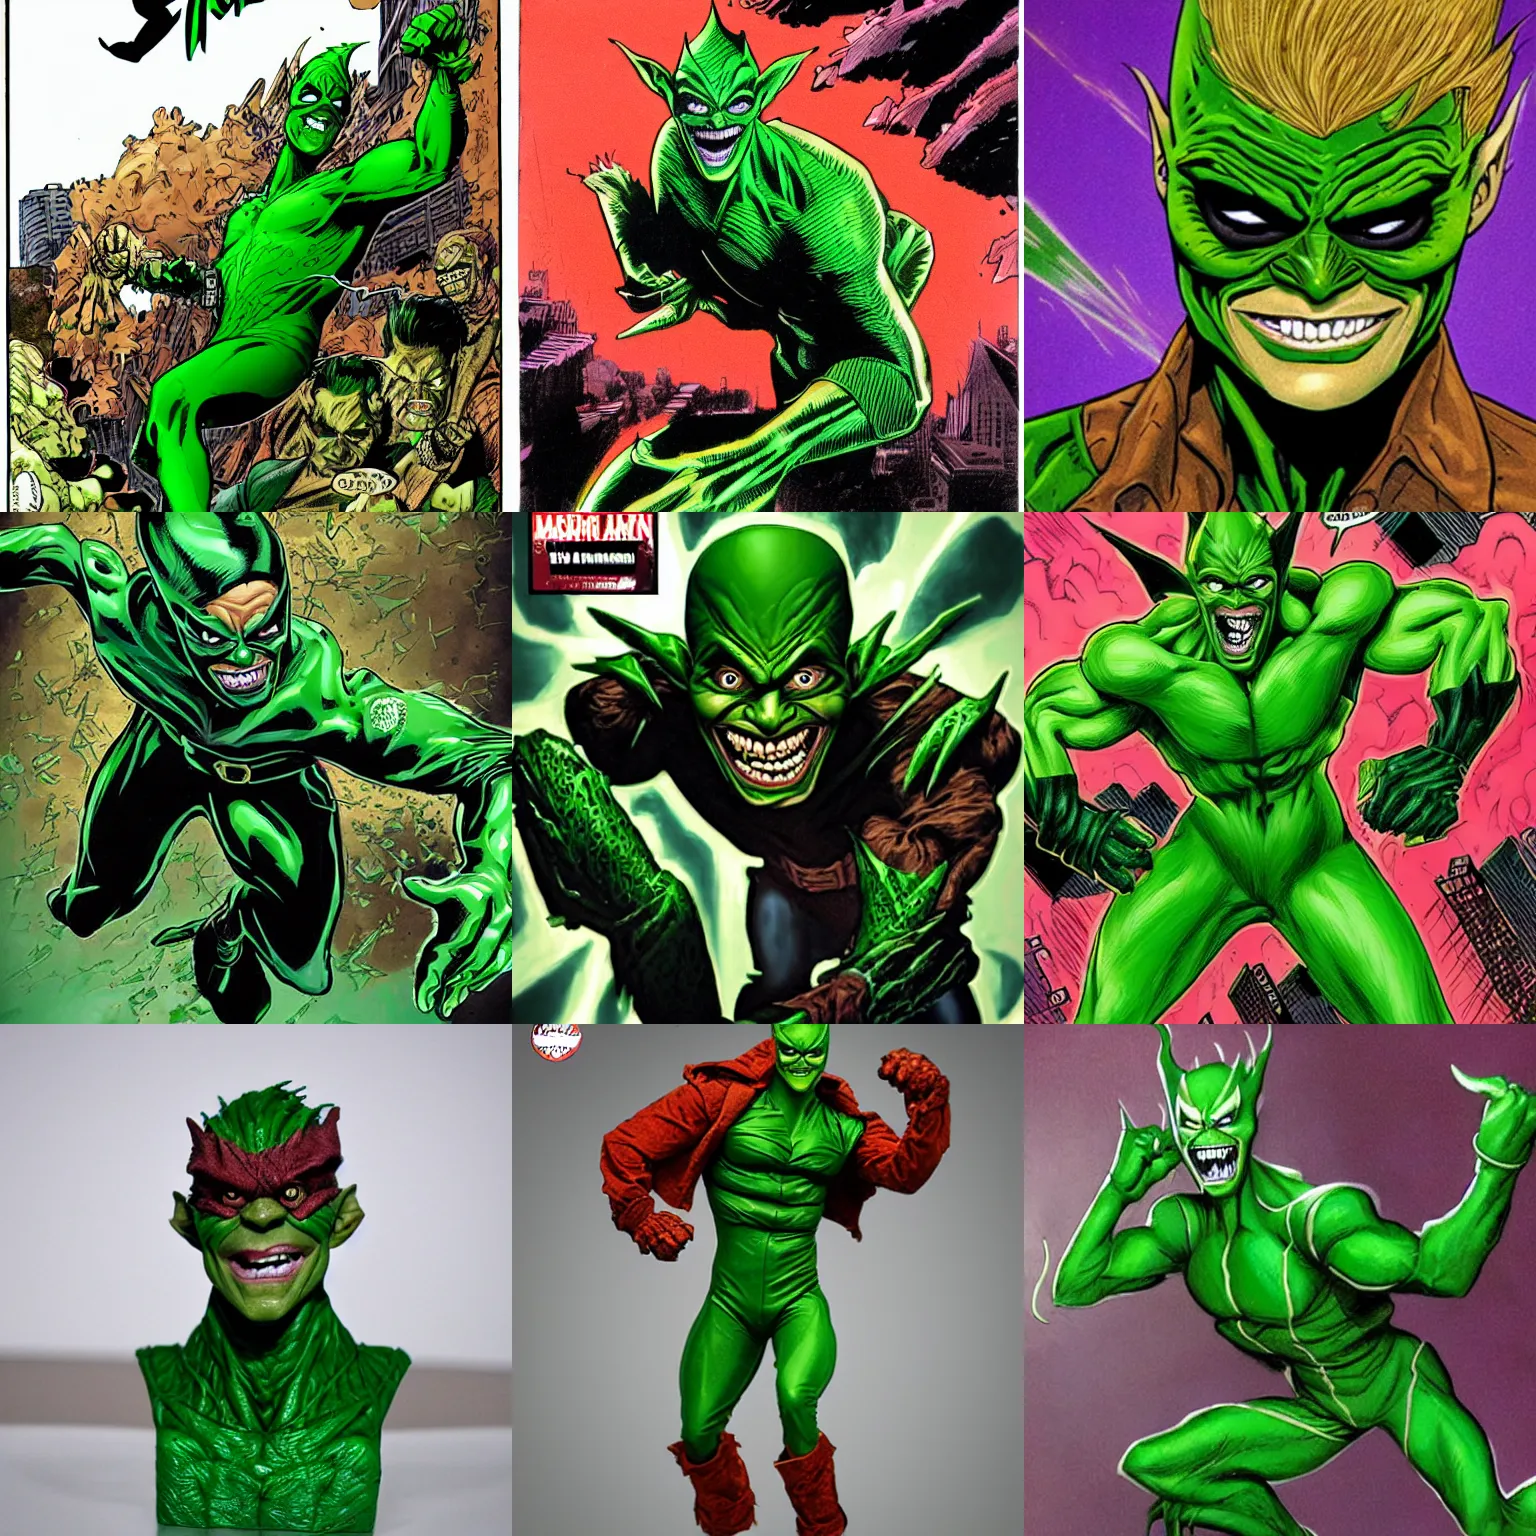 Prompt: The Green Goblin